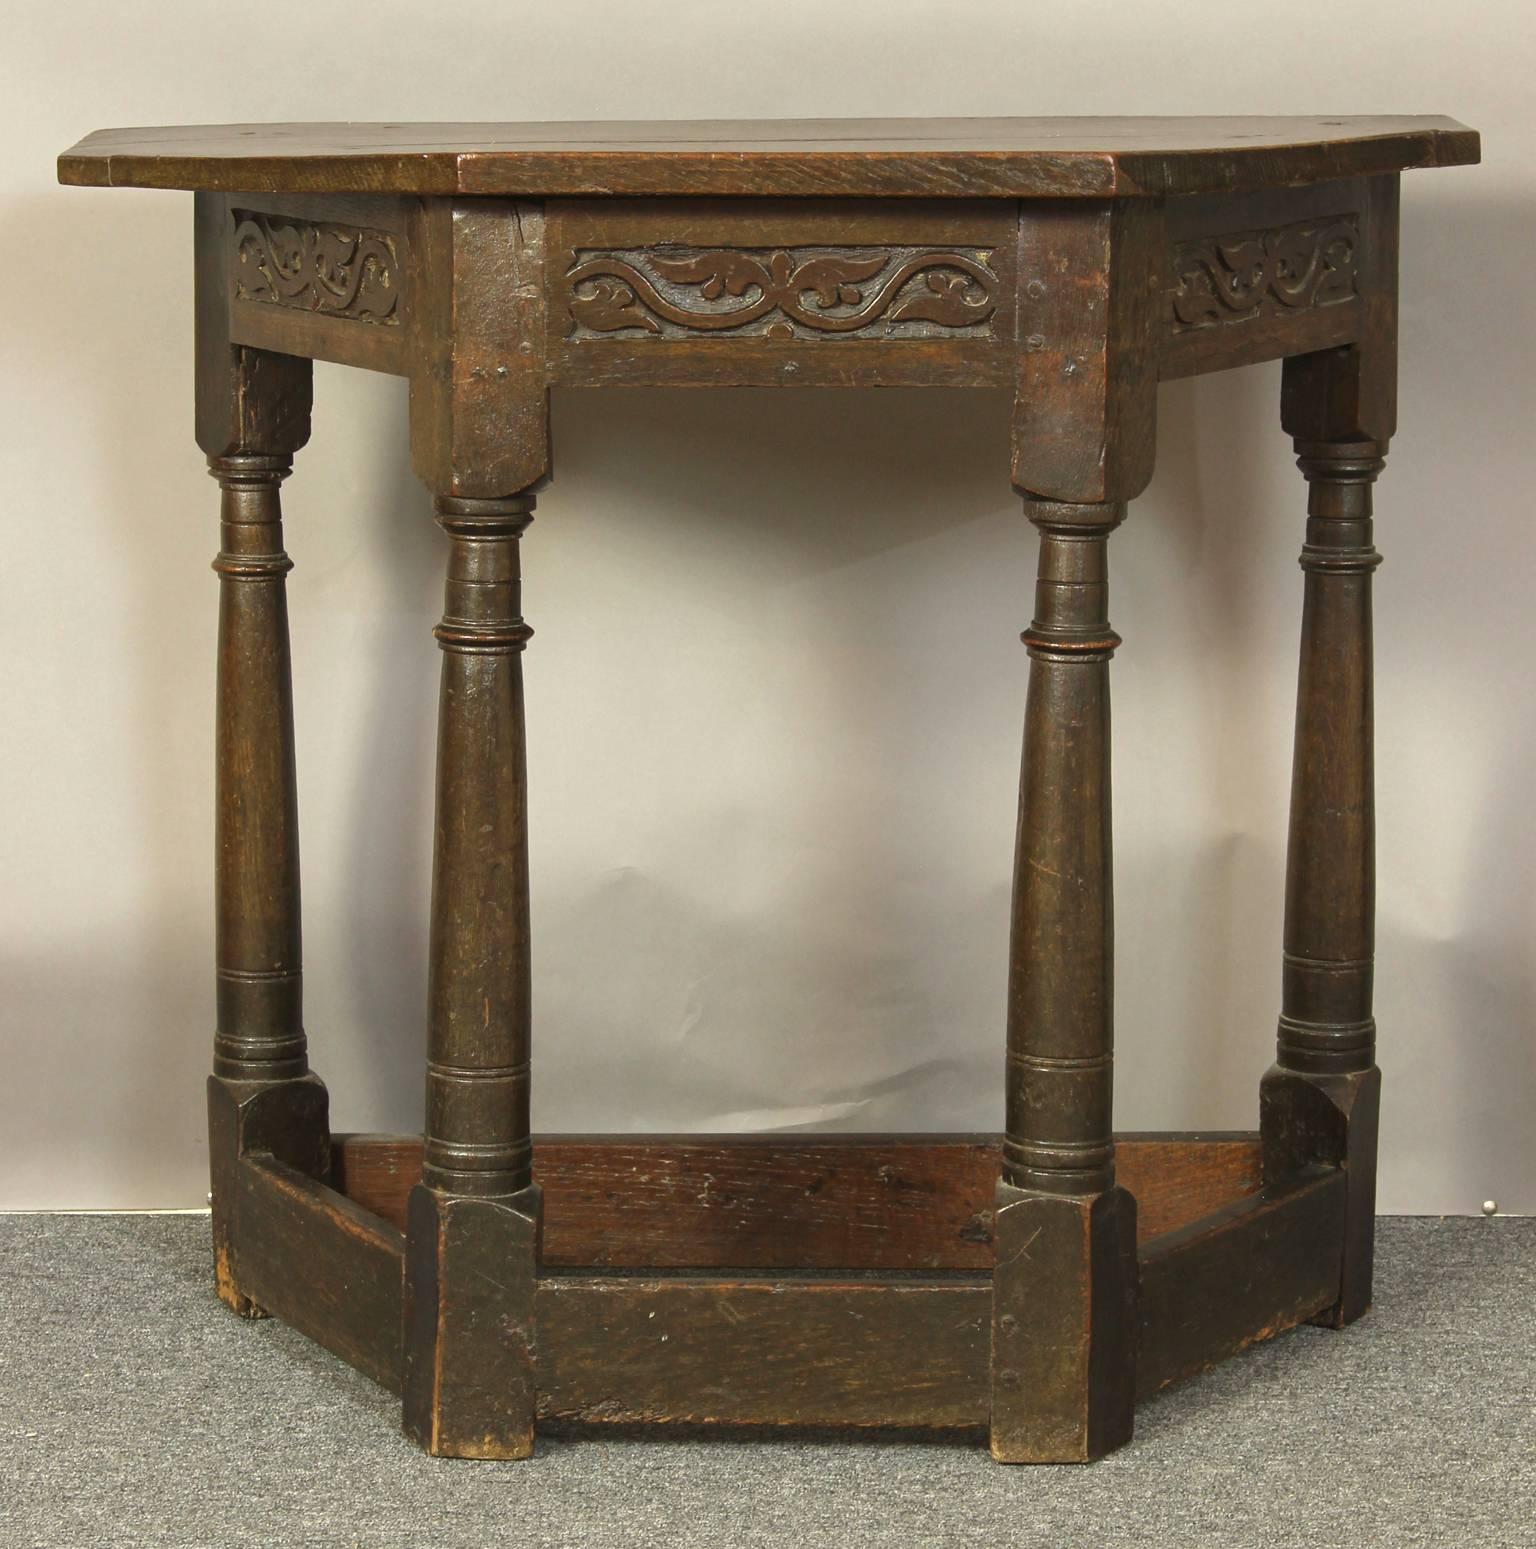 A small and charming early 18th century English oak console table with plank top, above a carved frieze with turned legs joined by stretchers.